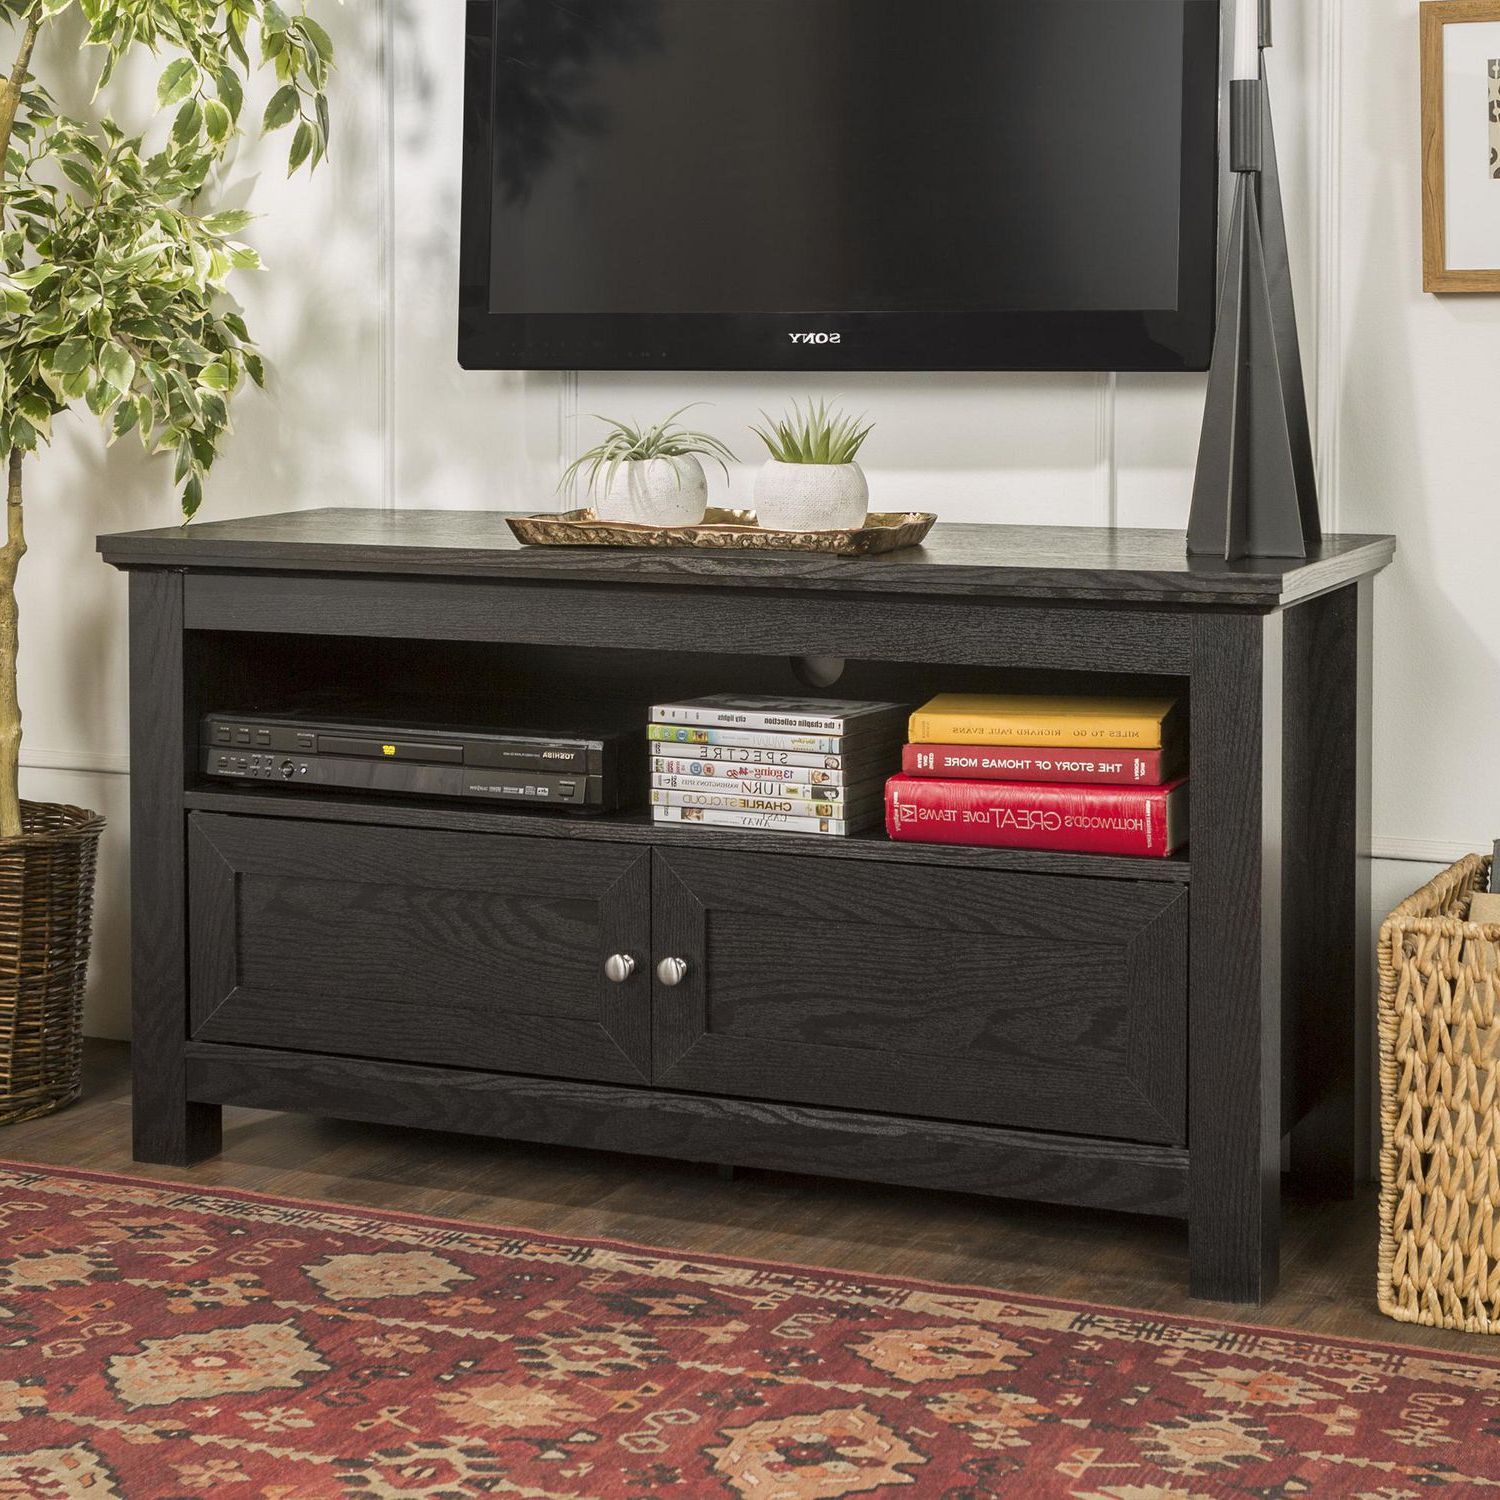 Manor Park Simple Rustic Tv Stand For Tv's Up To 48 With Regard To Urban Rustic Tv Stands (Gallery 2 of 20)